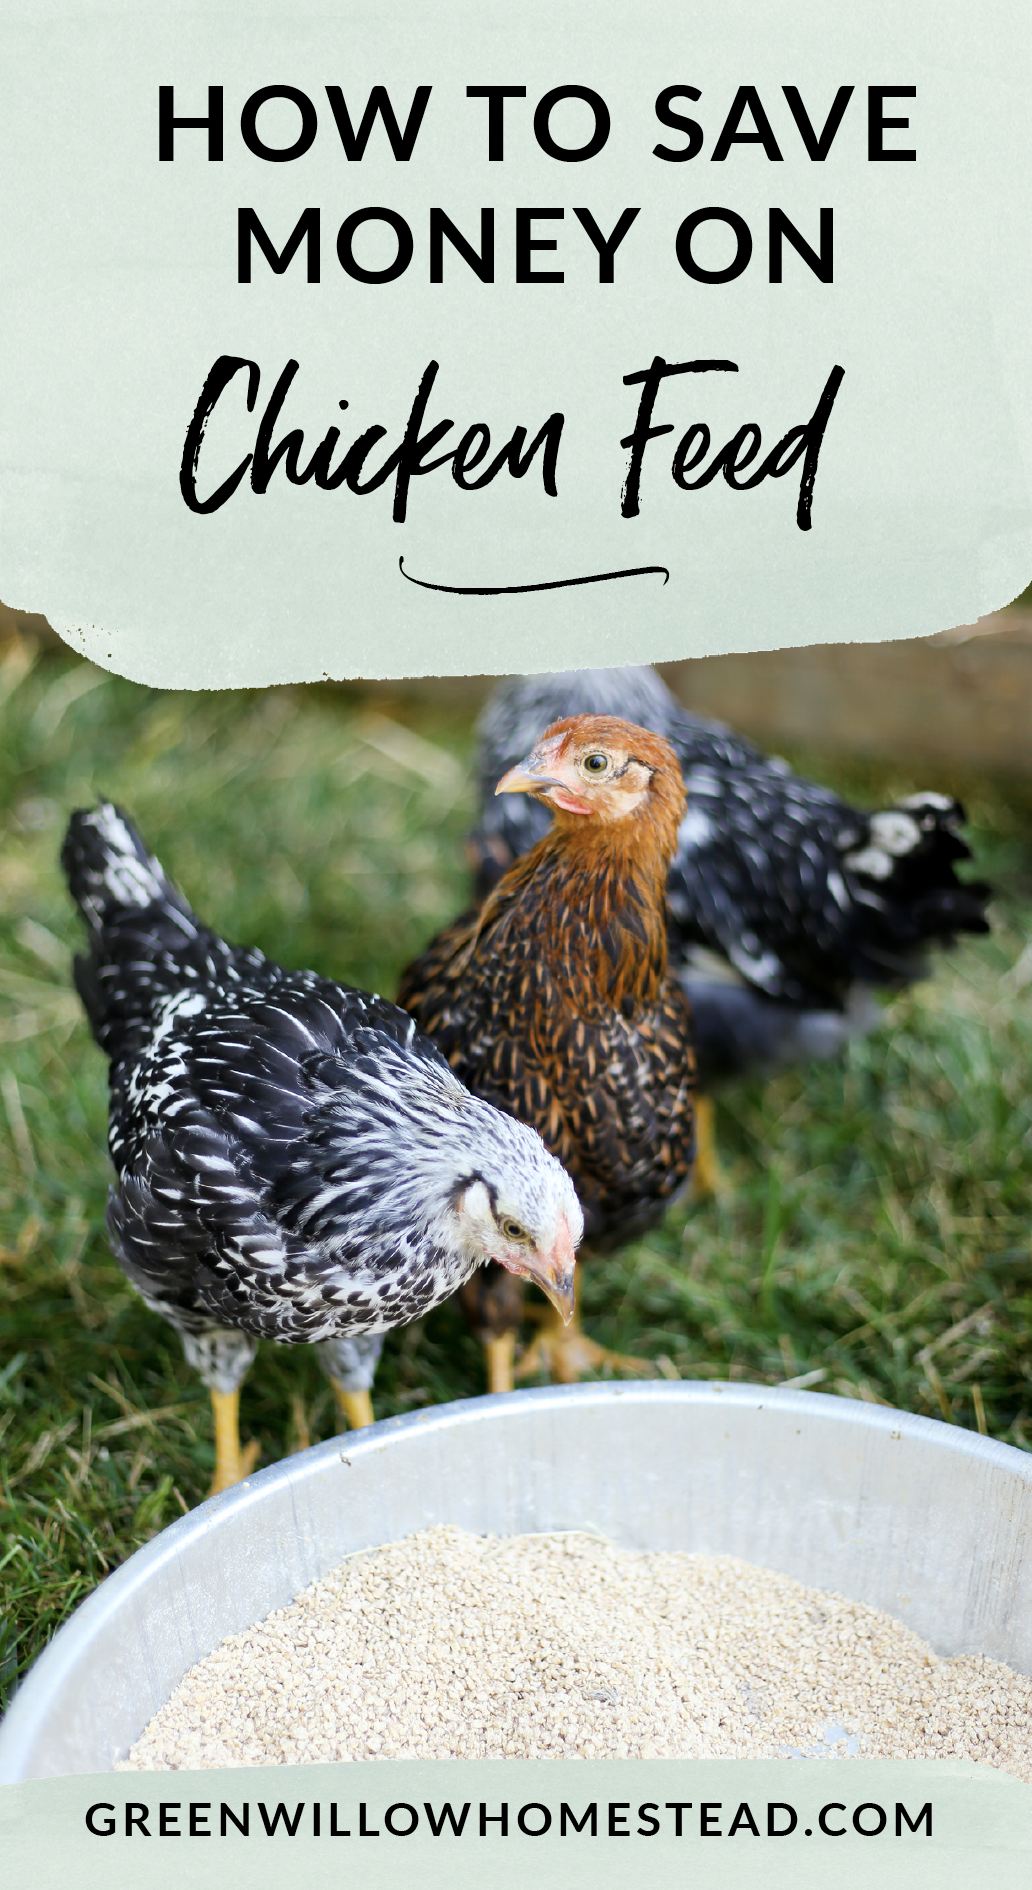 How to save money on chicken feed costs